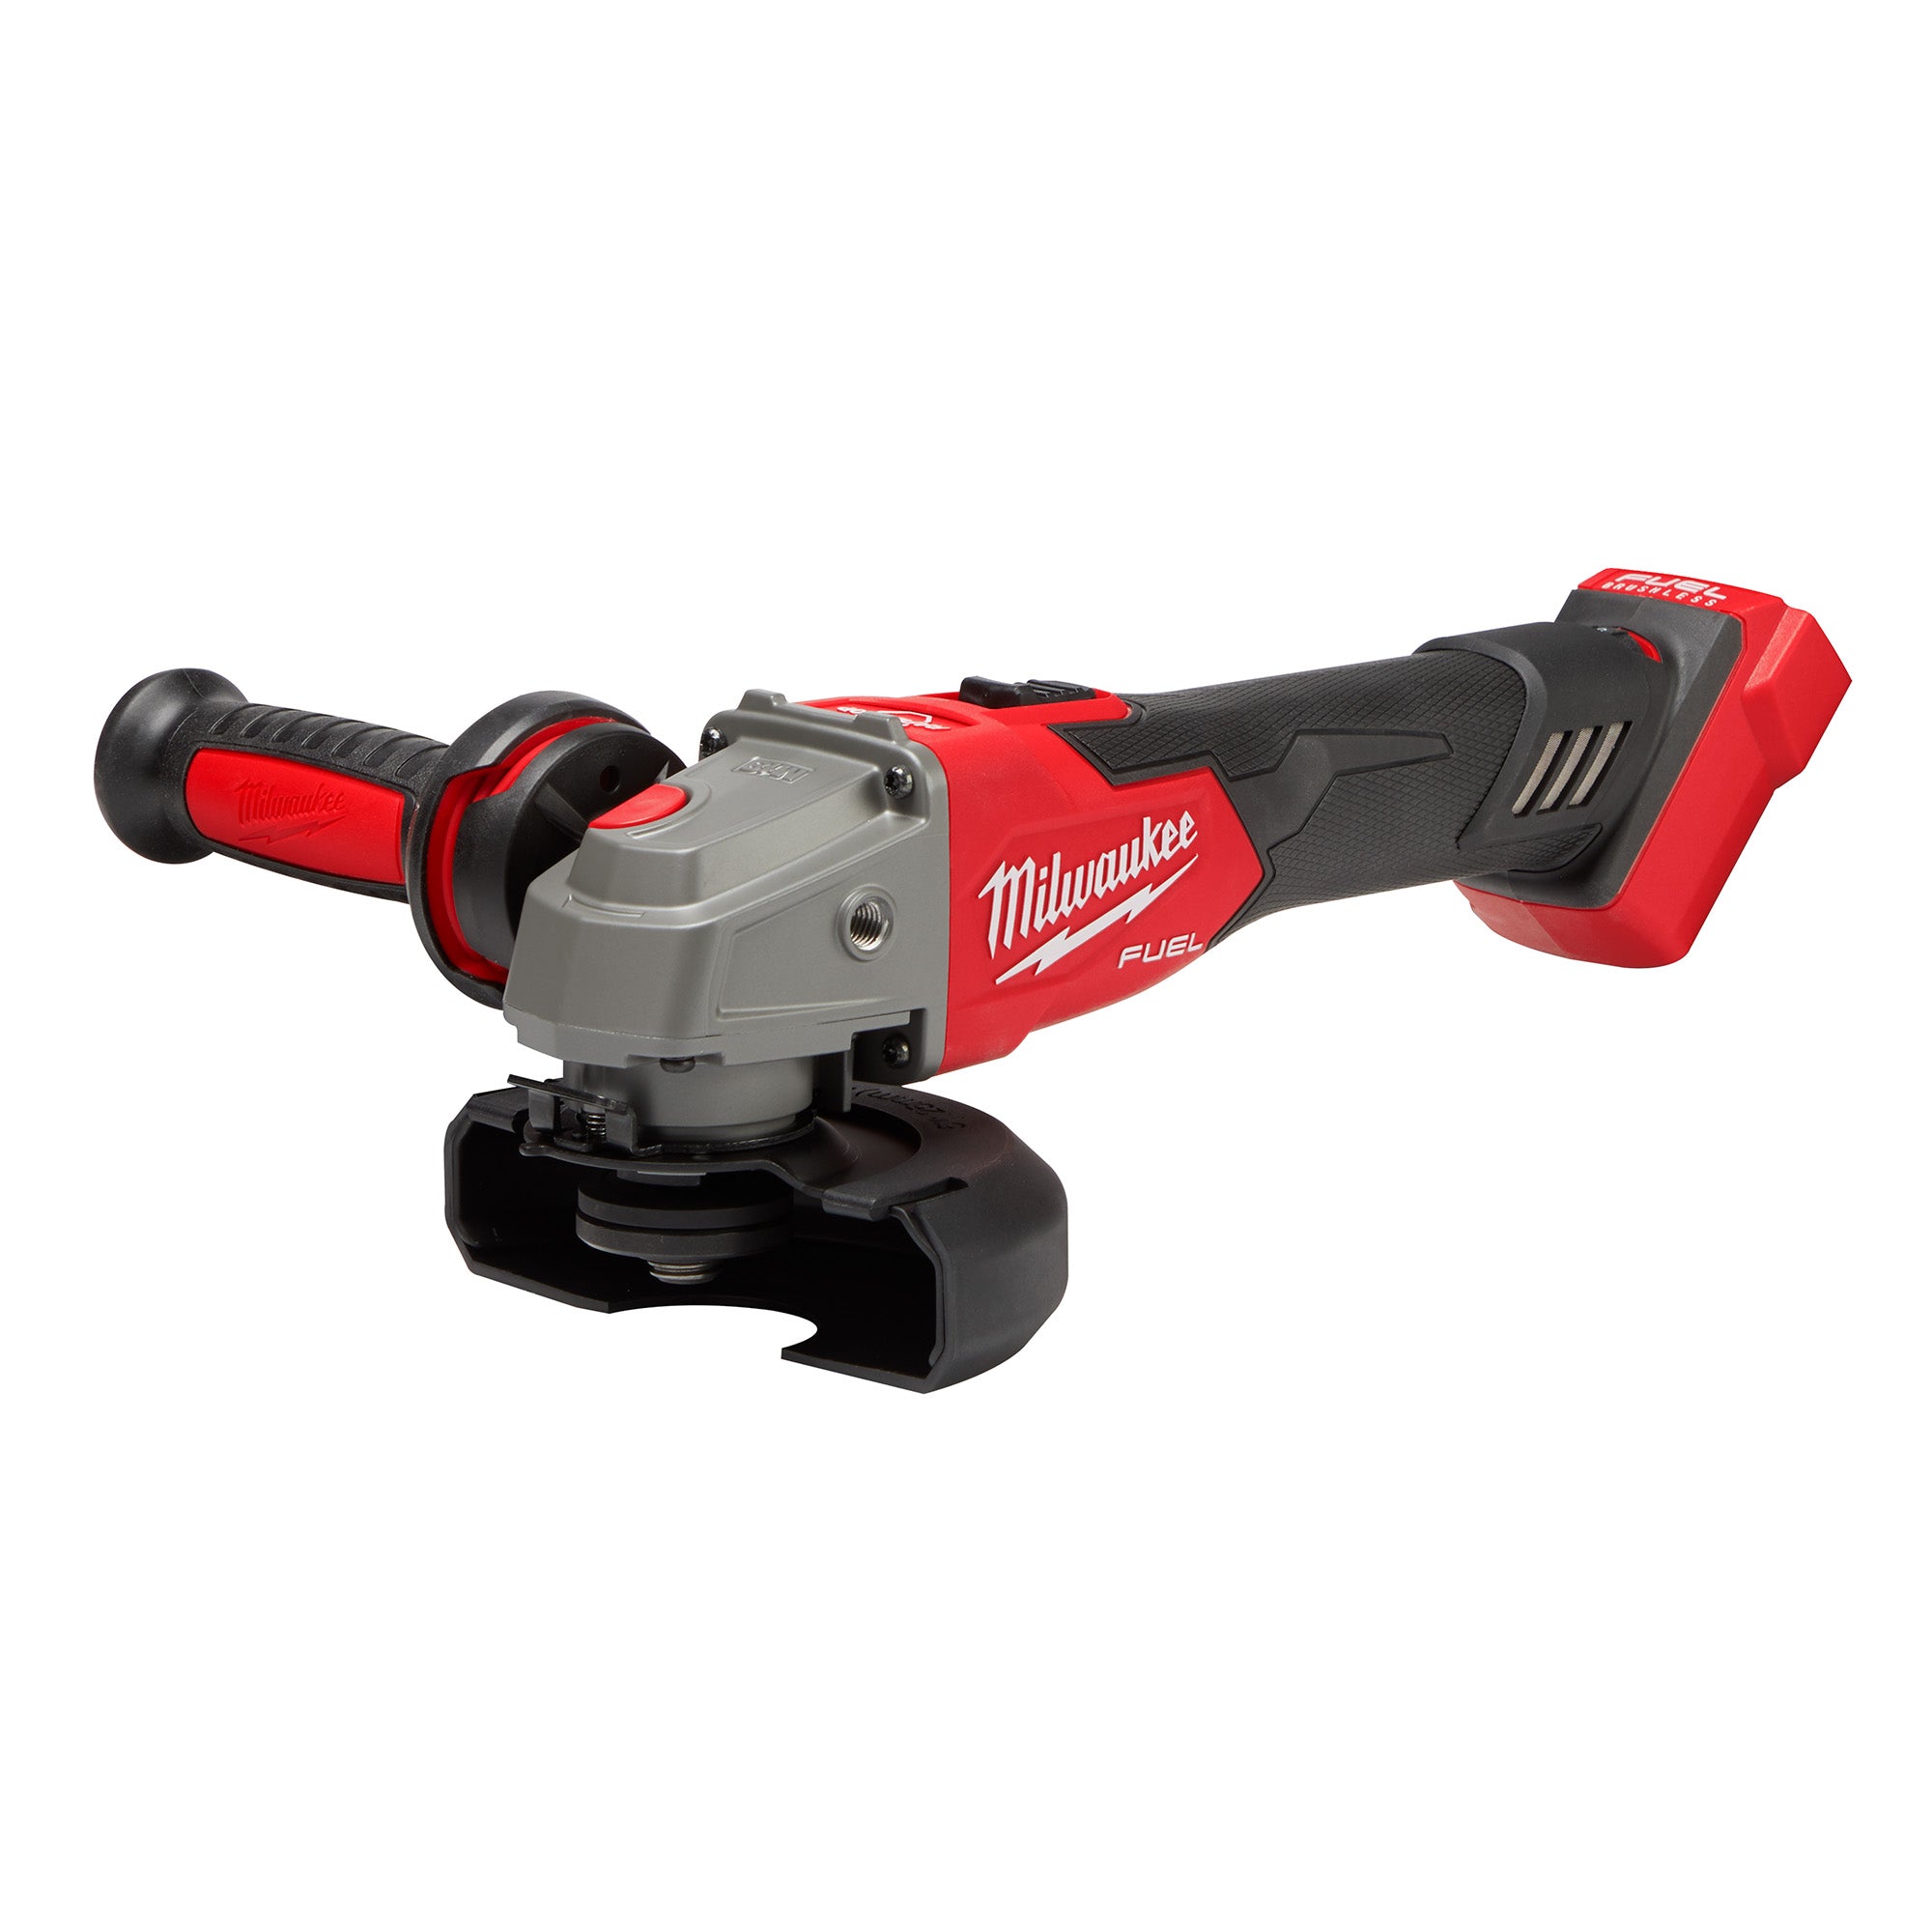 18V M18 FUEL Lithium-Ion Brushless Cordless 4-1/2" / 5" Variable Speed Braking Slide Switch Lock-On Grinder (Tool Only)